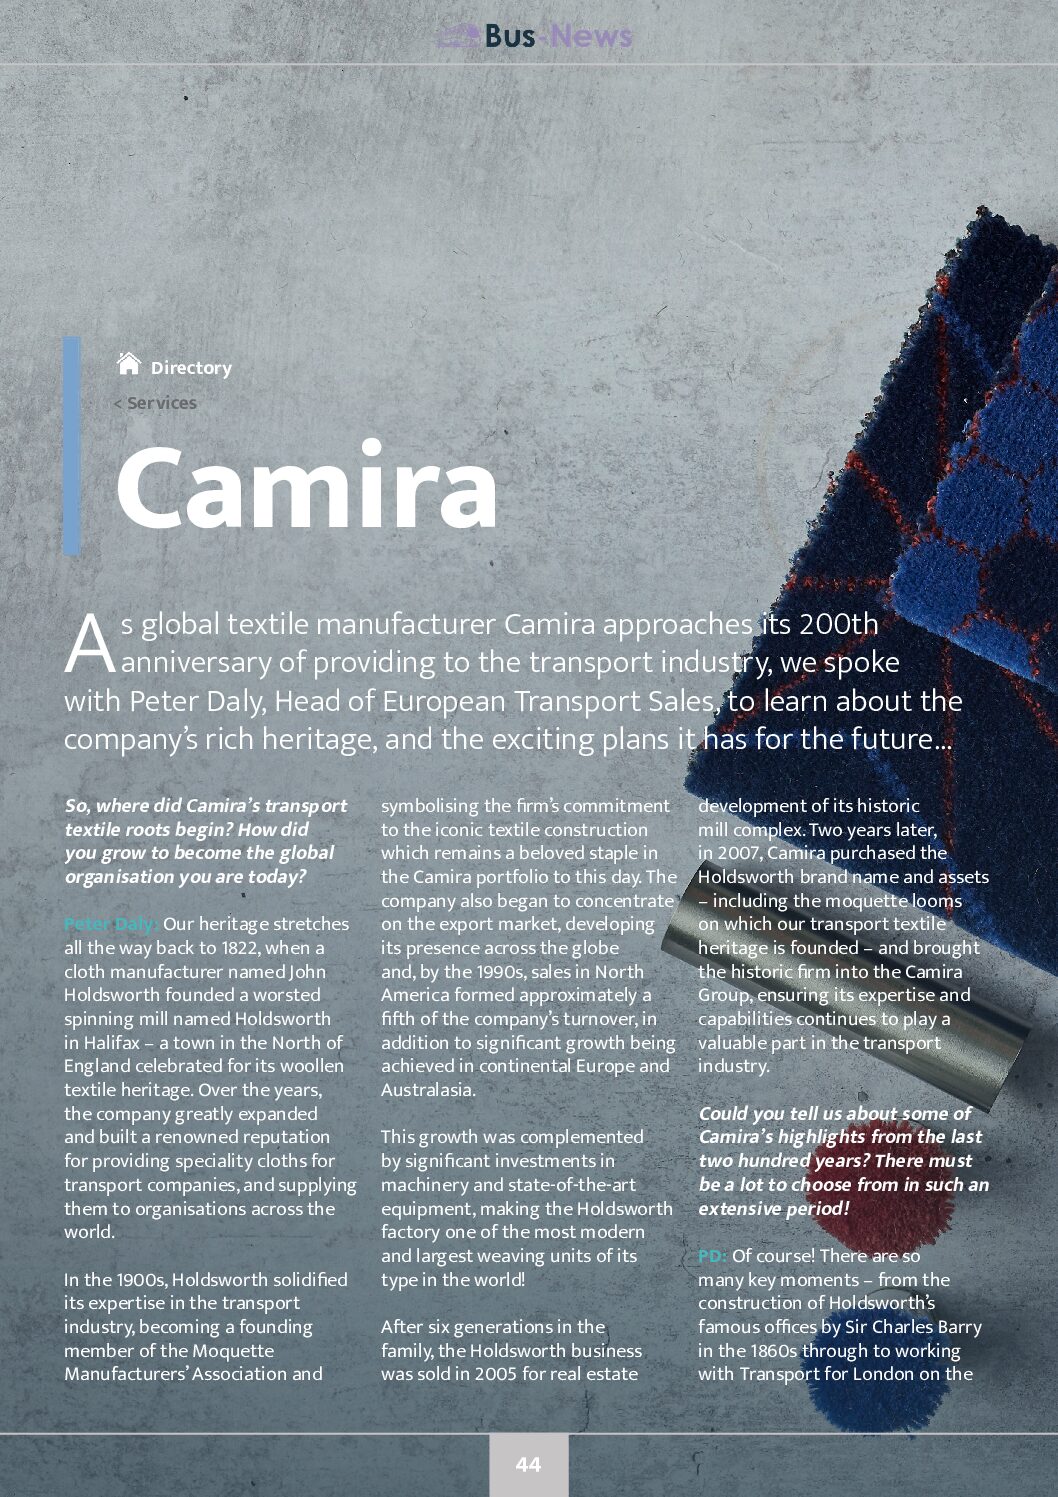 Camira: A Glimpse into the Future with Peter Daly